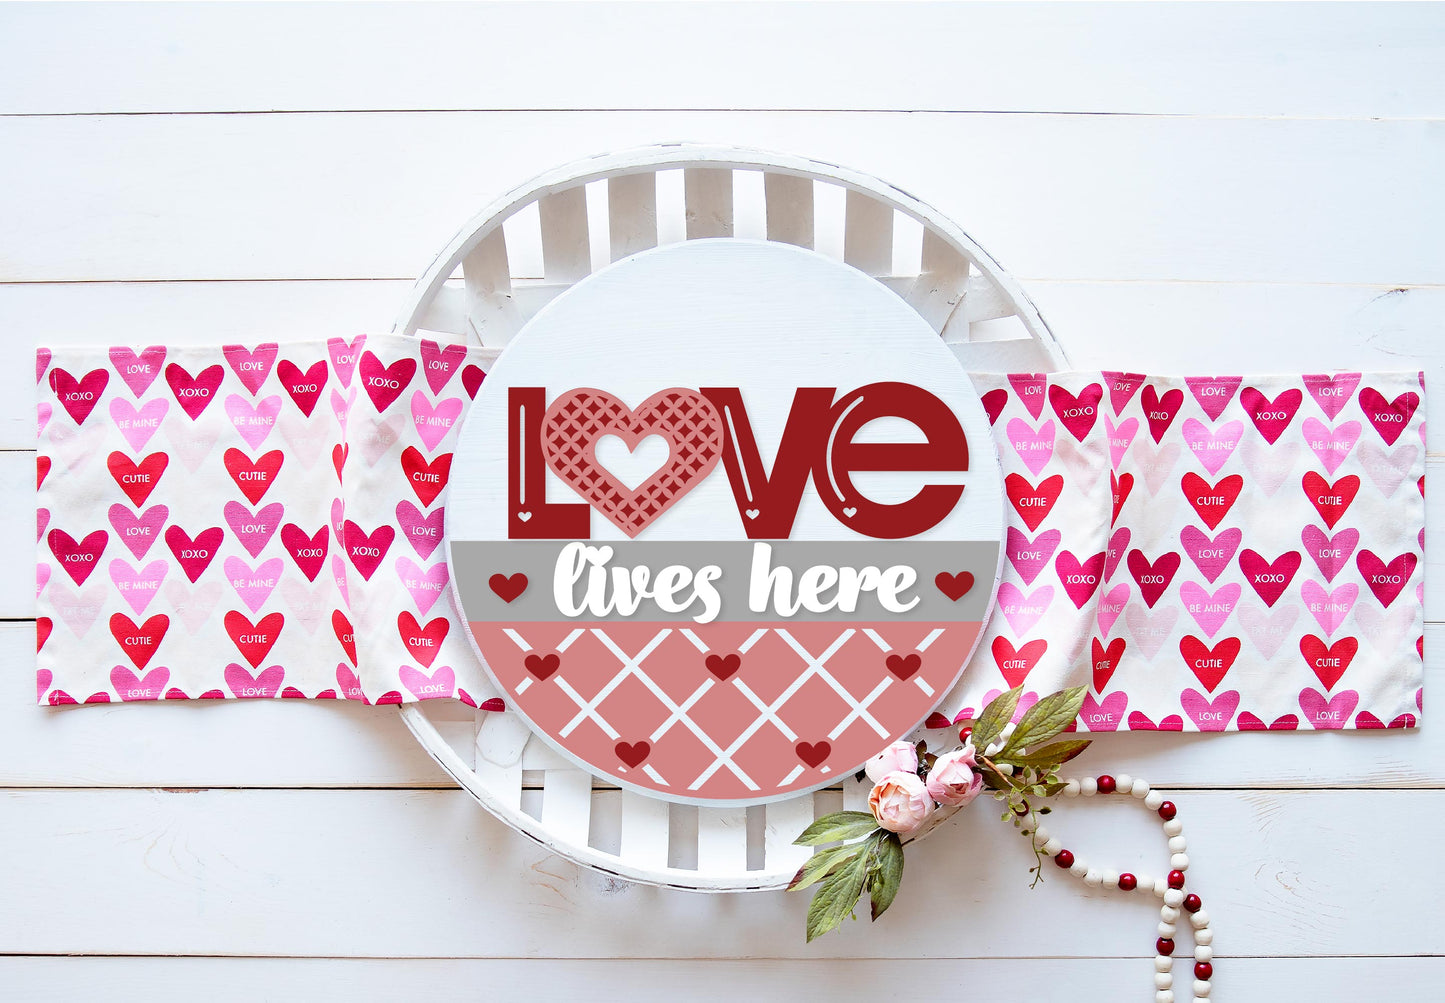 Love lives here sign